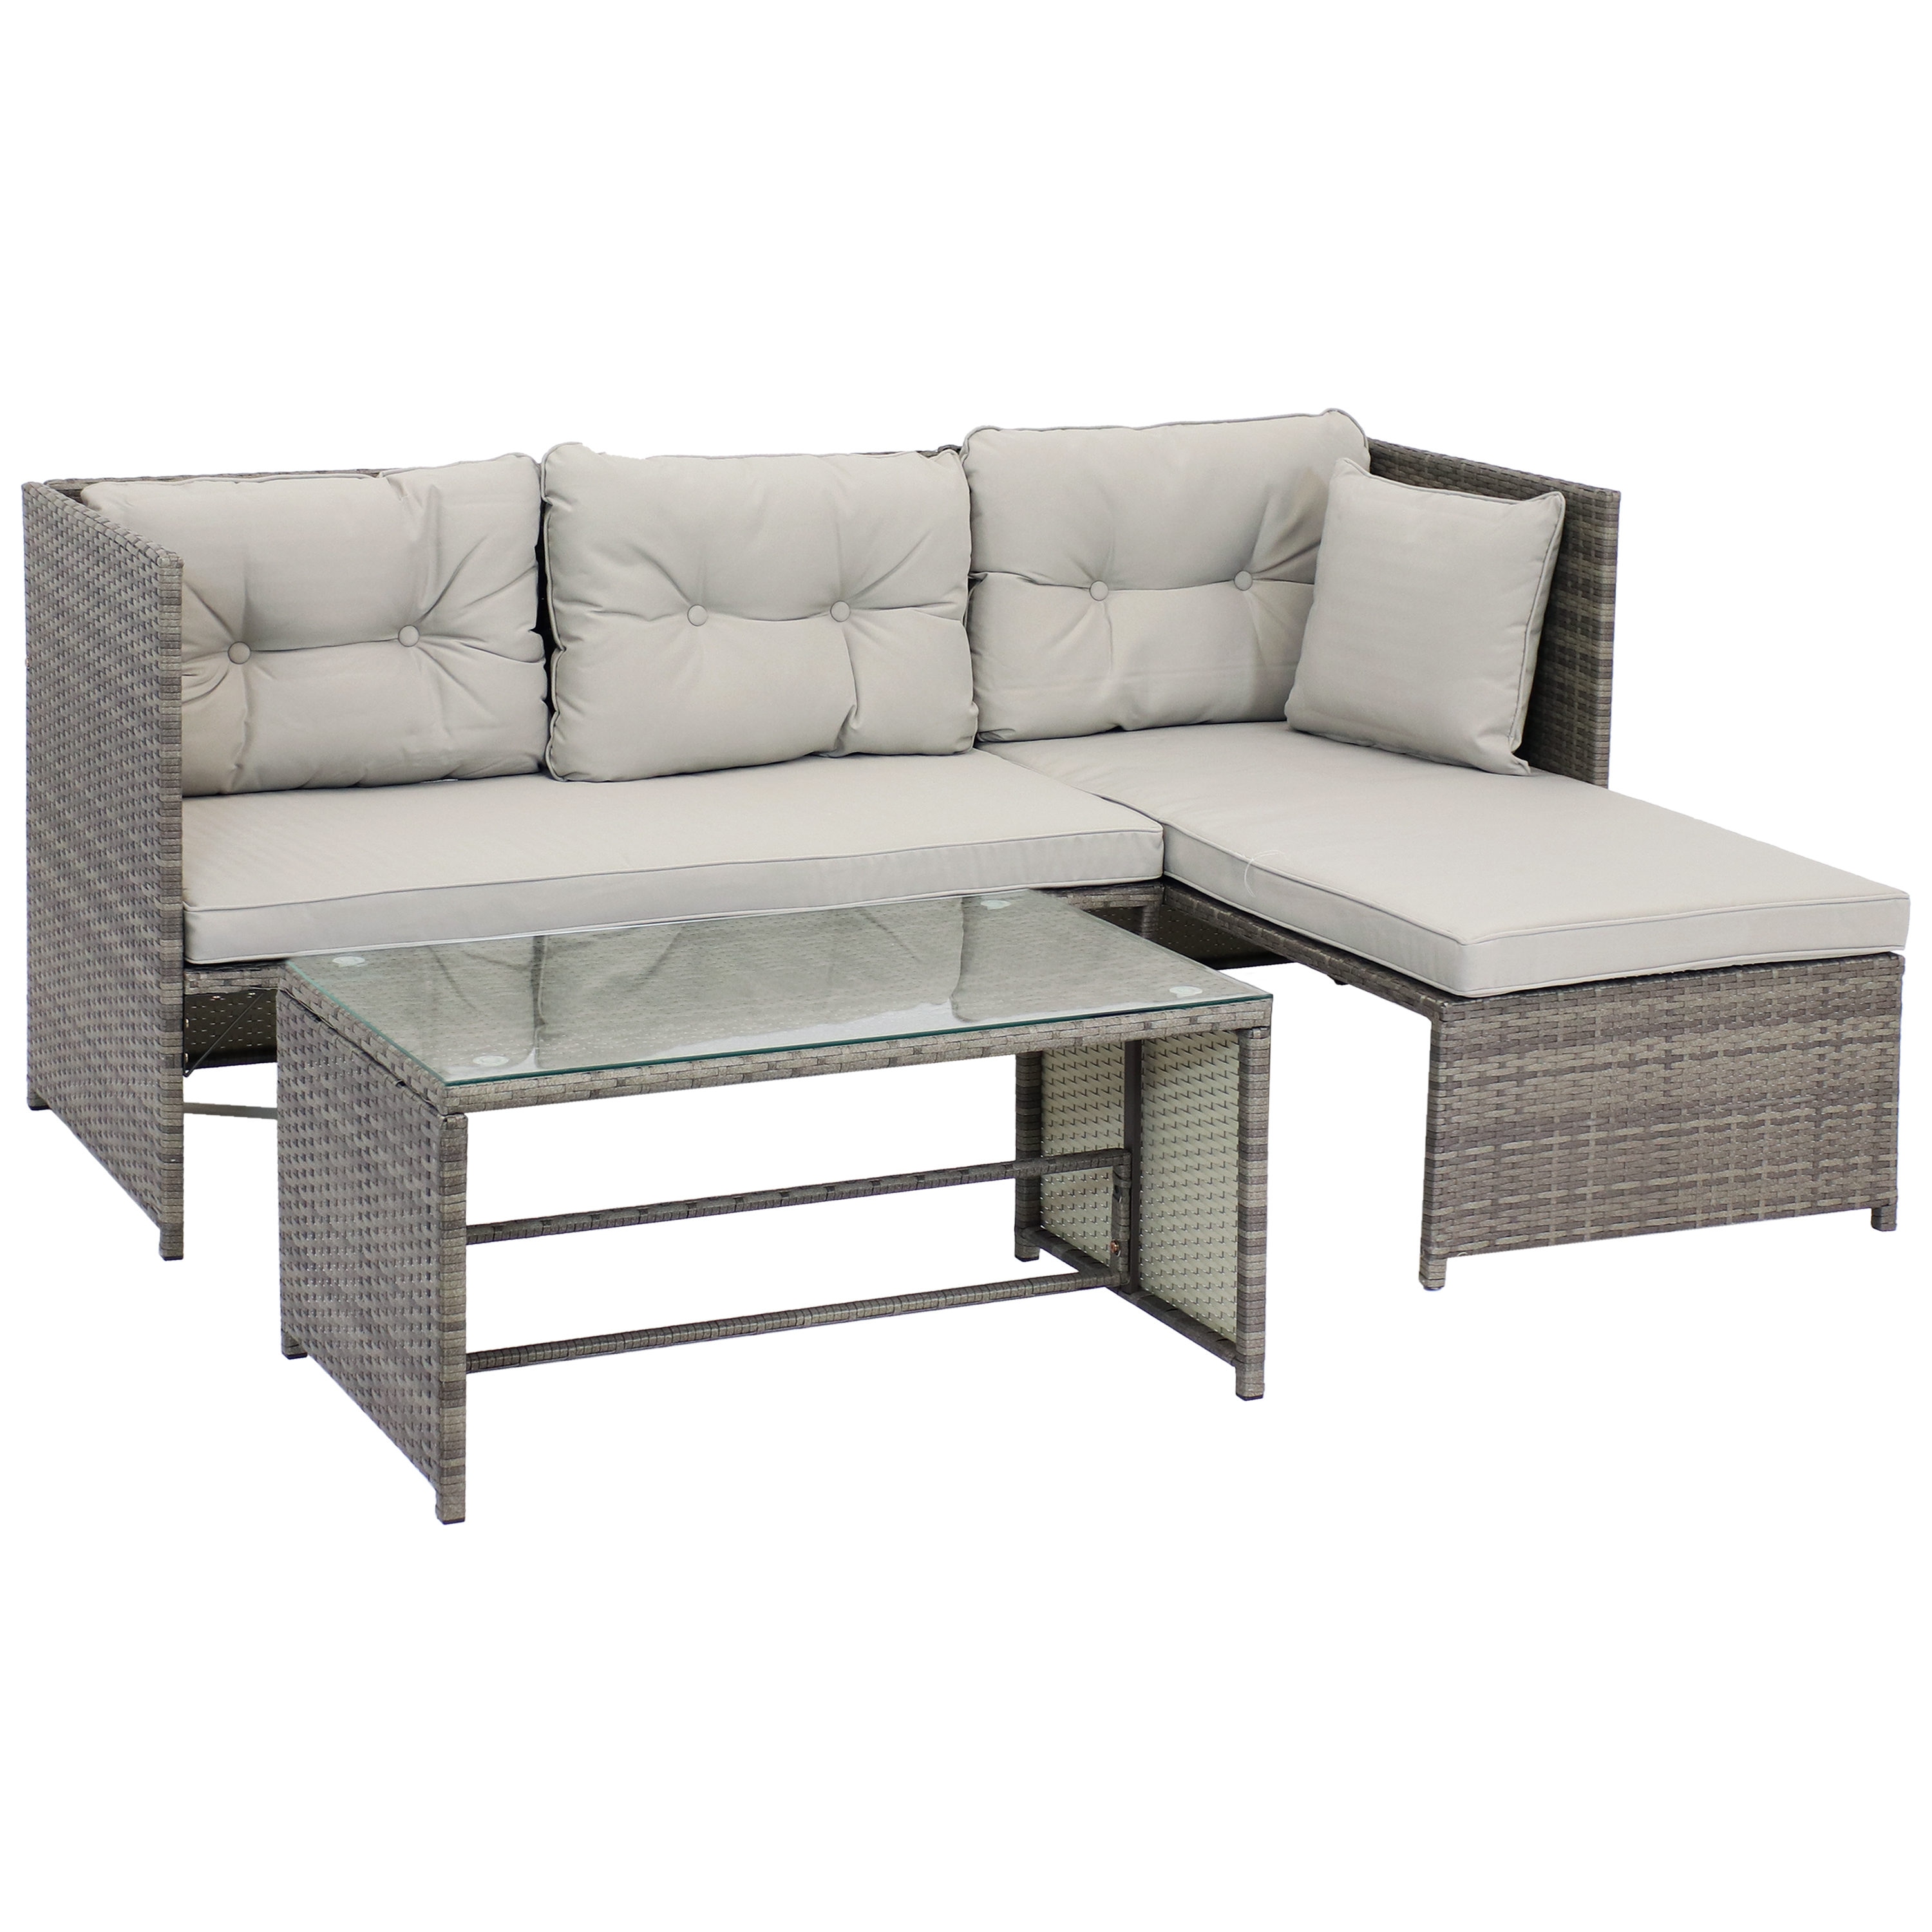 geluid Heup Dekking Sunnydaze Decor Sunnydaze Longford High-Back Rattan Chaise Sofa Patio  Sectional Furniture Set - Stone Gray in the Patio Sectionals & Sofas  department at Lowes.com